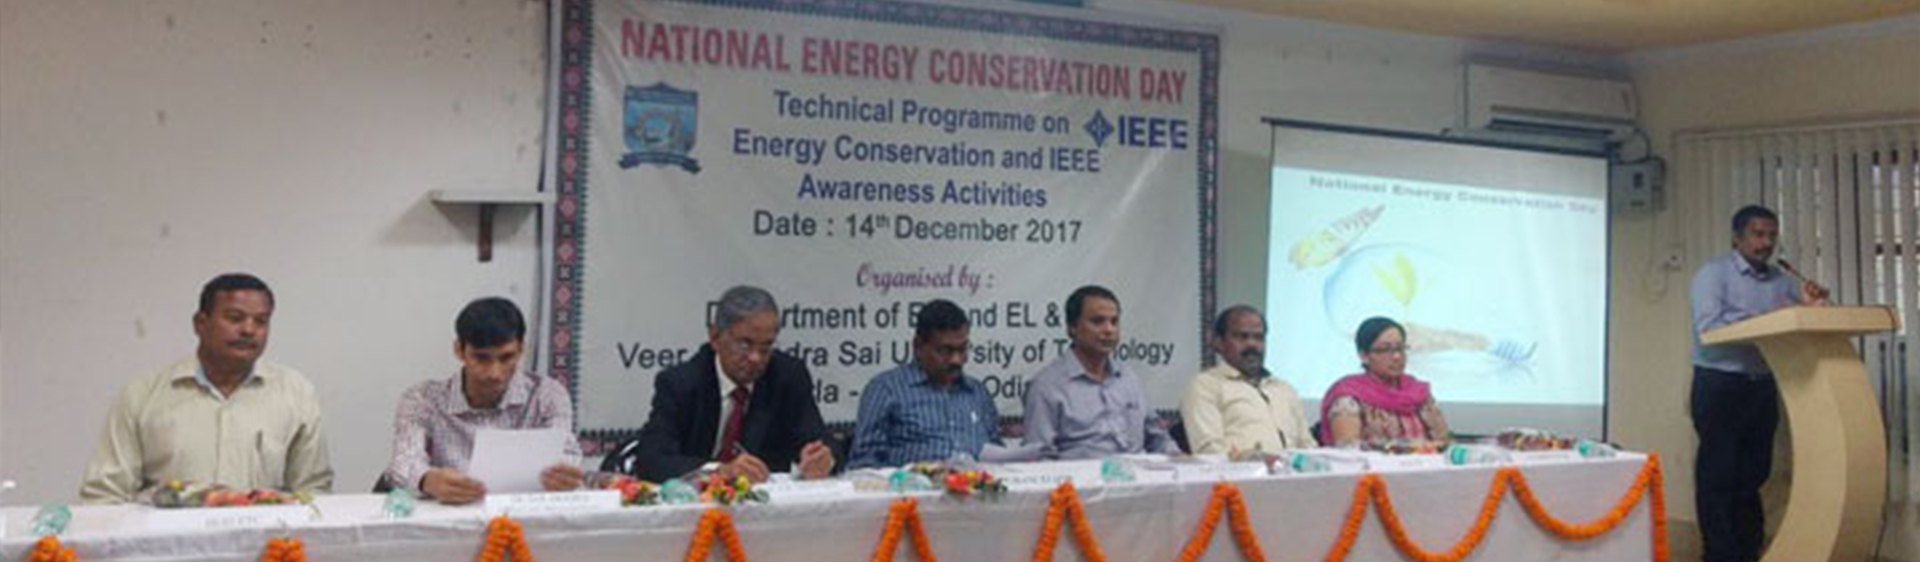 National Energy Conservation Day was Celebrated at VSSUT